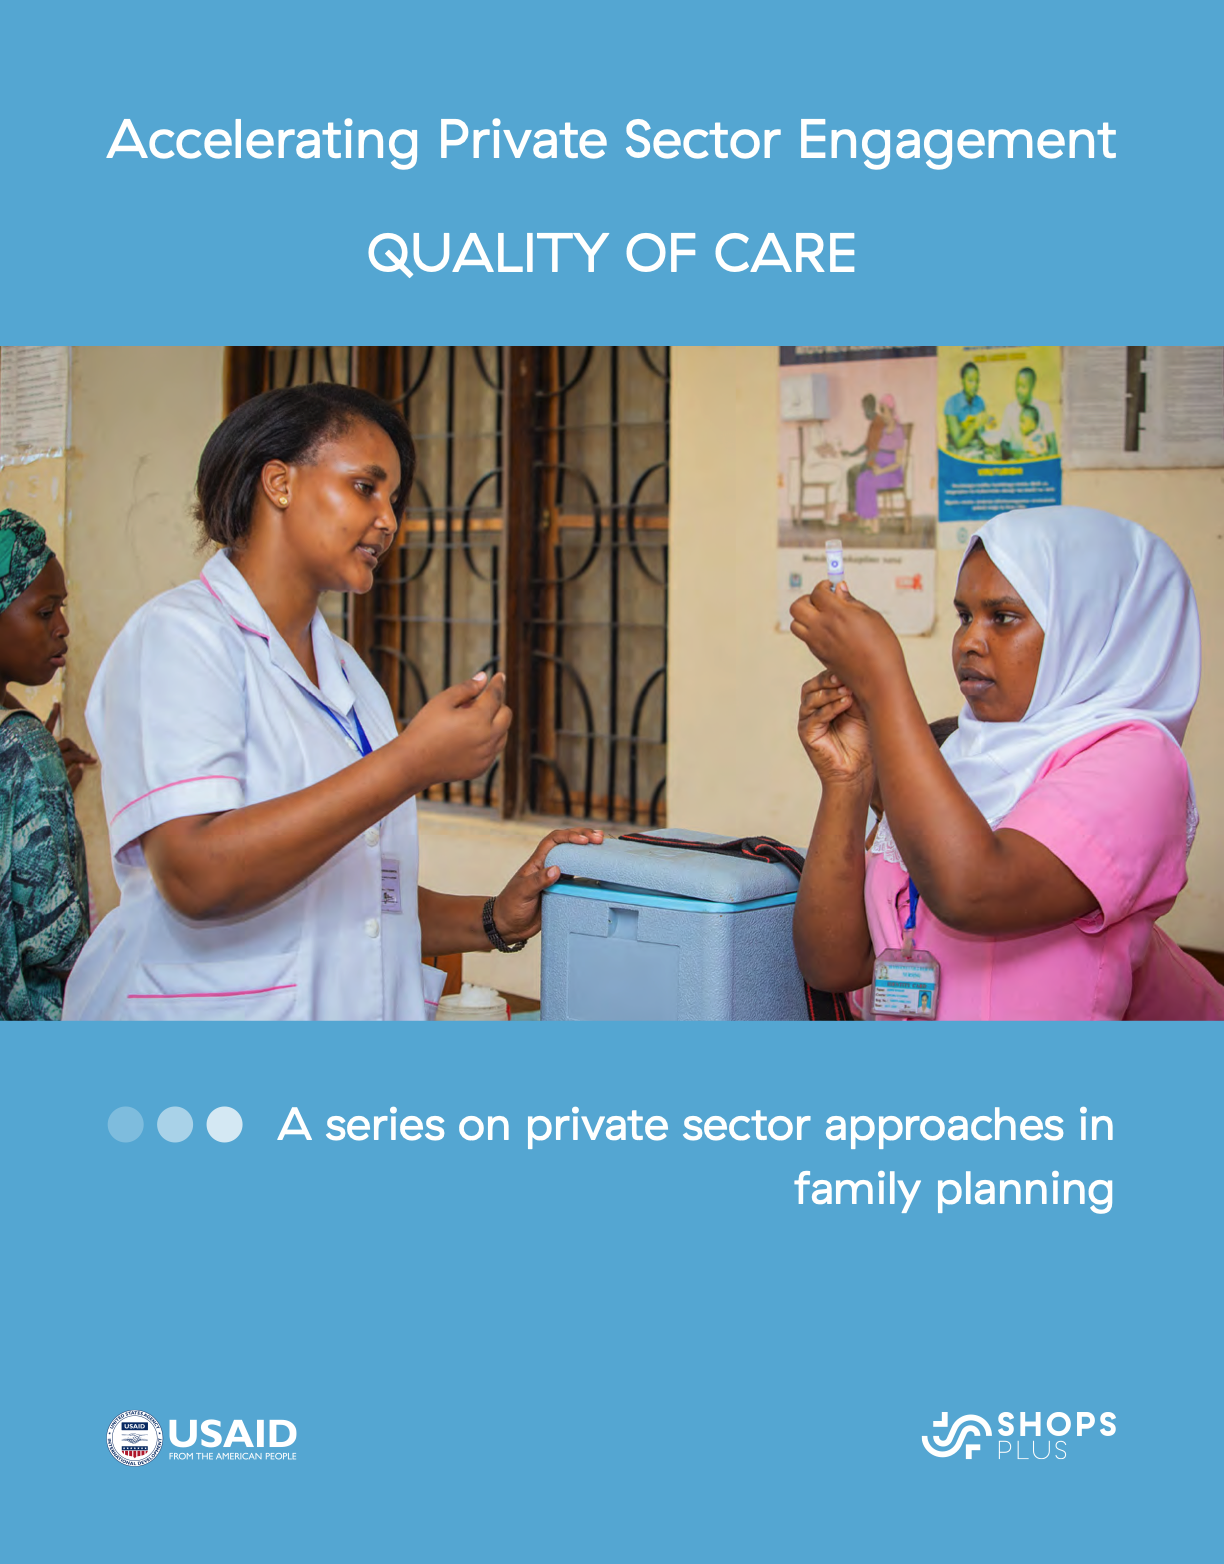 Cover for the brief on Accelerating Private Sector Engagement: Quality of Care